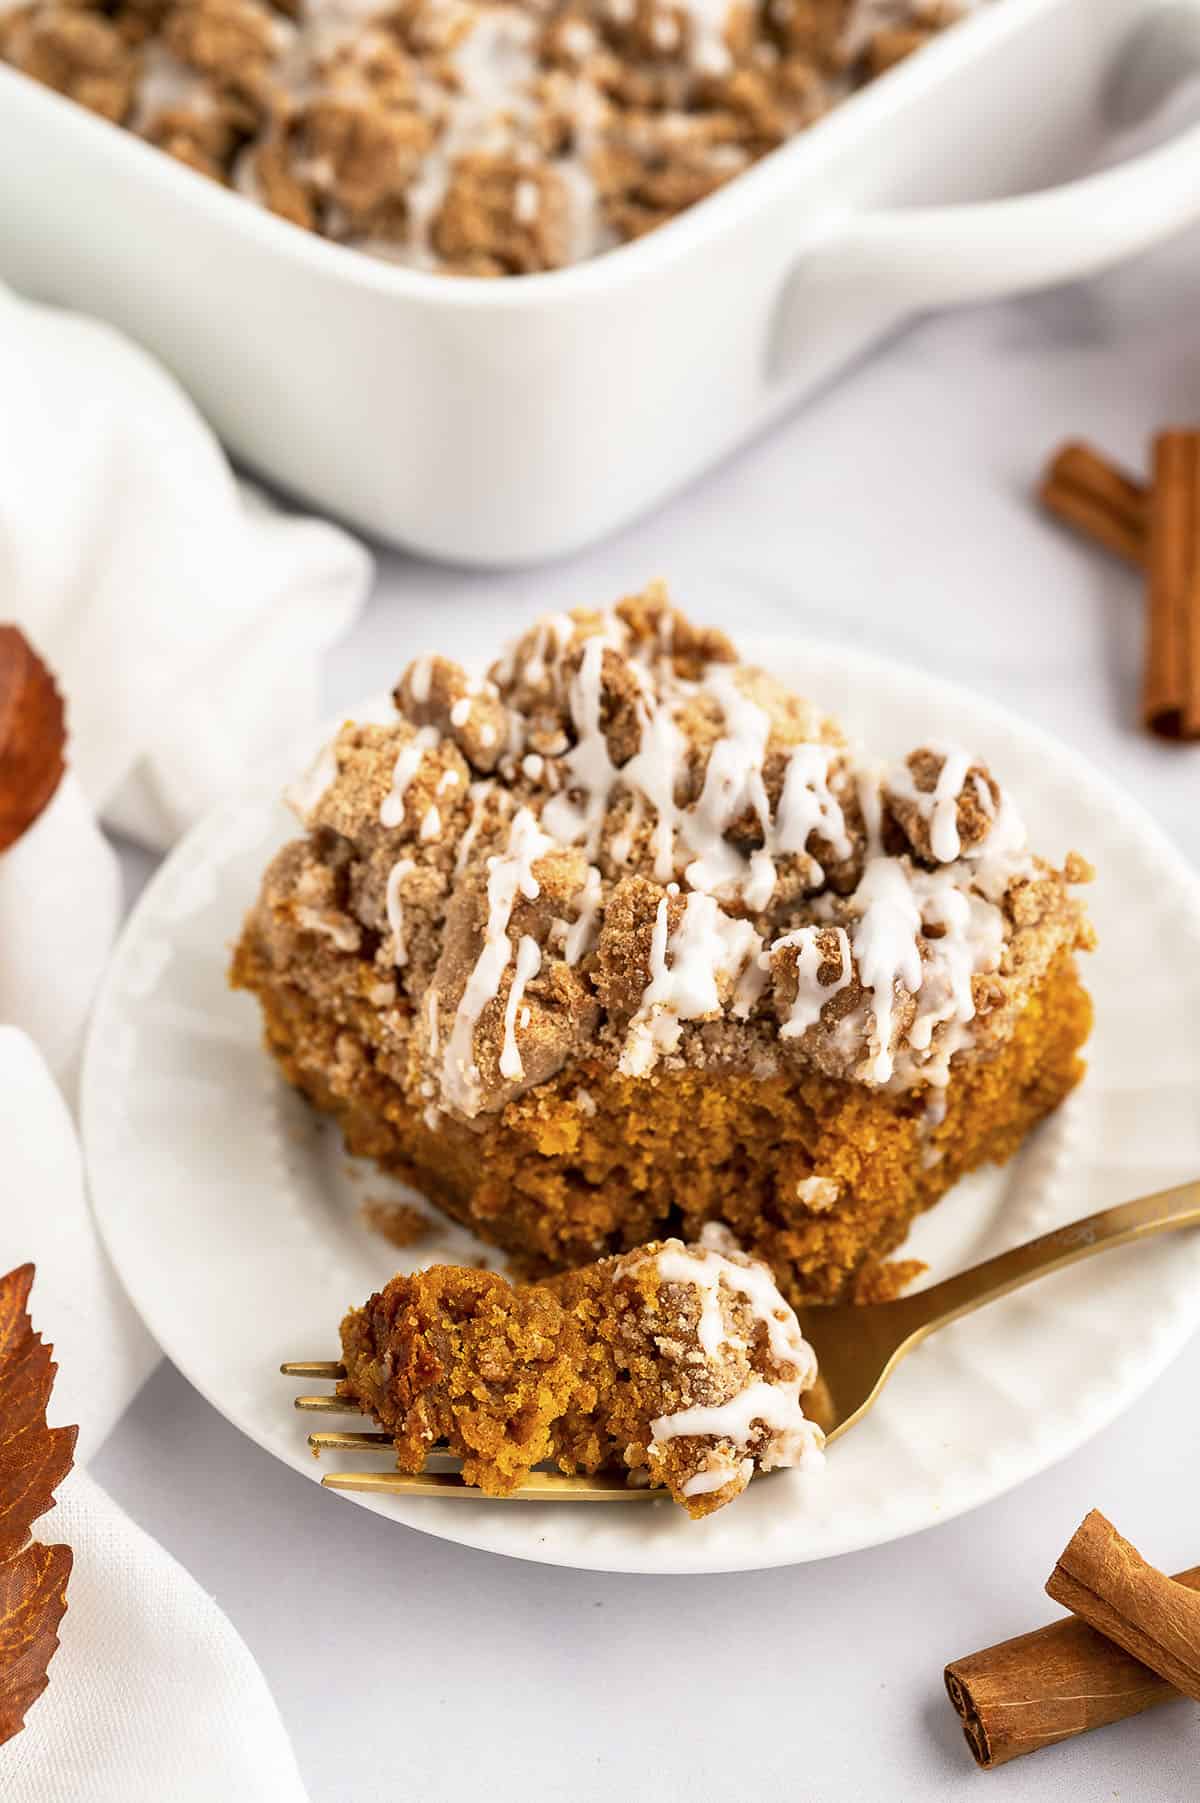 Pumpkin cake recipe on white plate with fork.